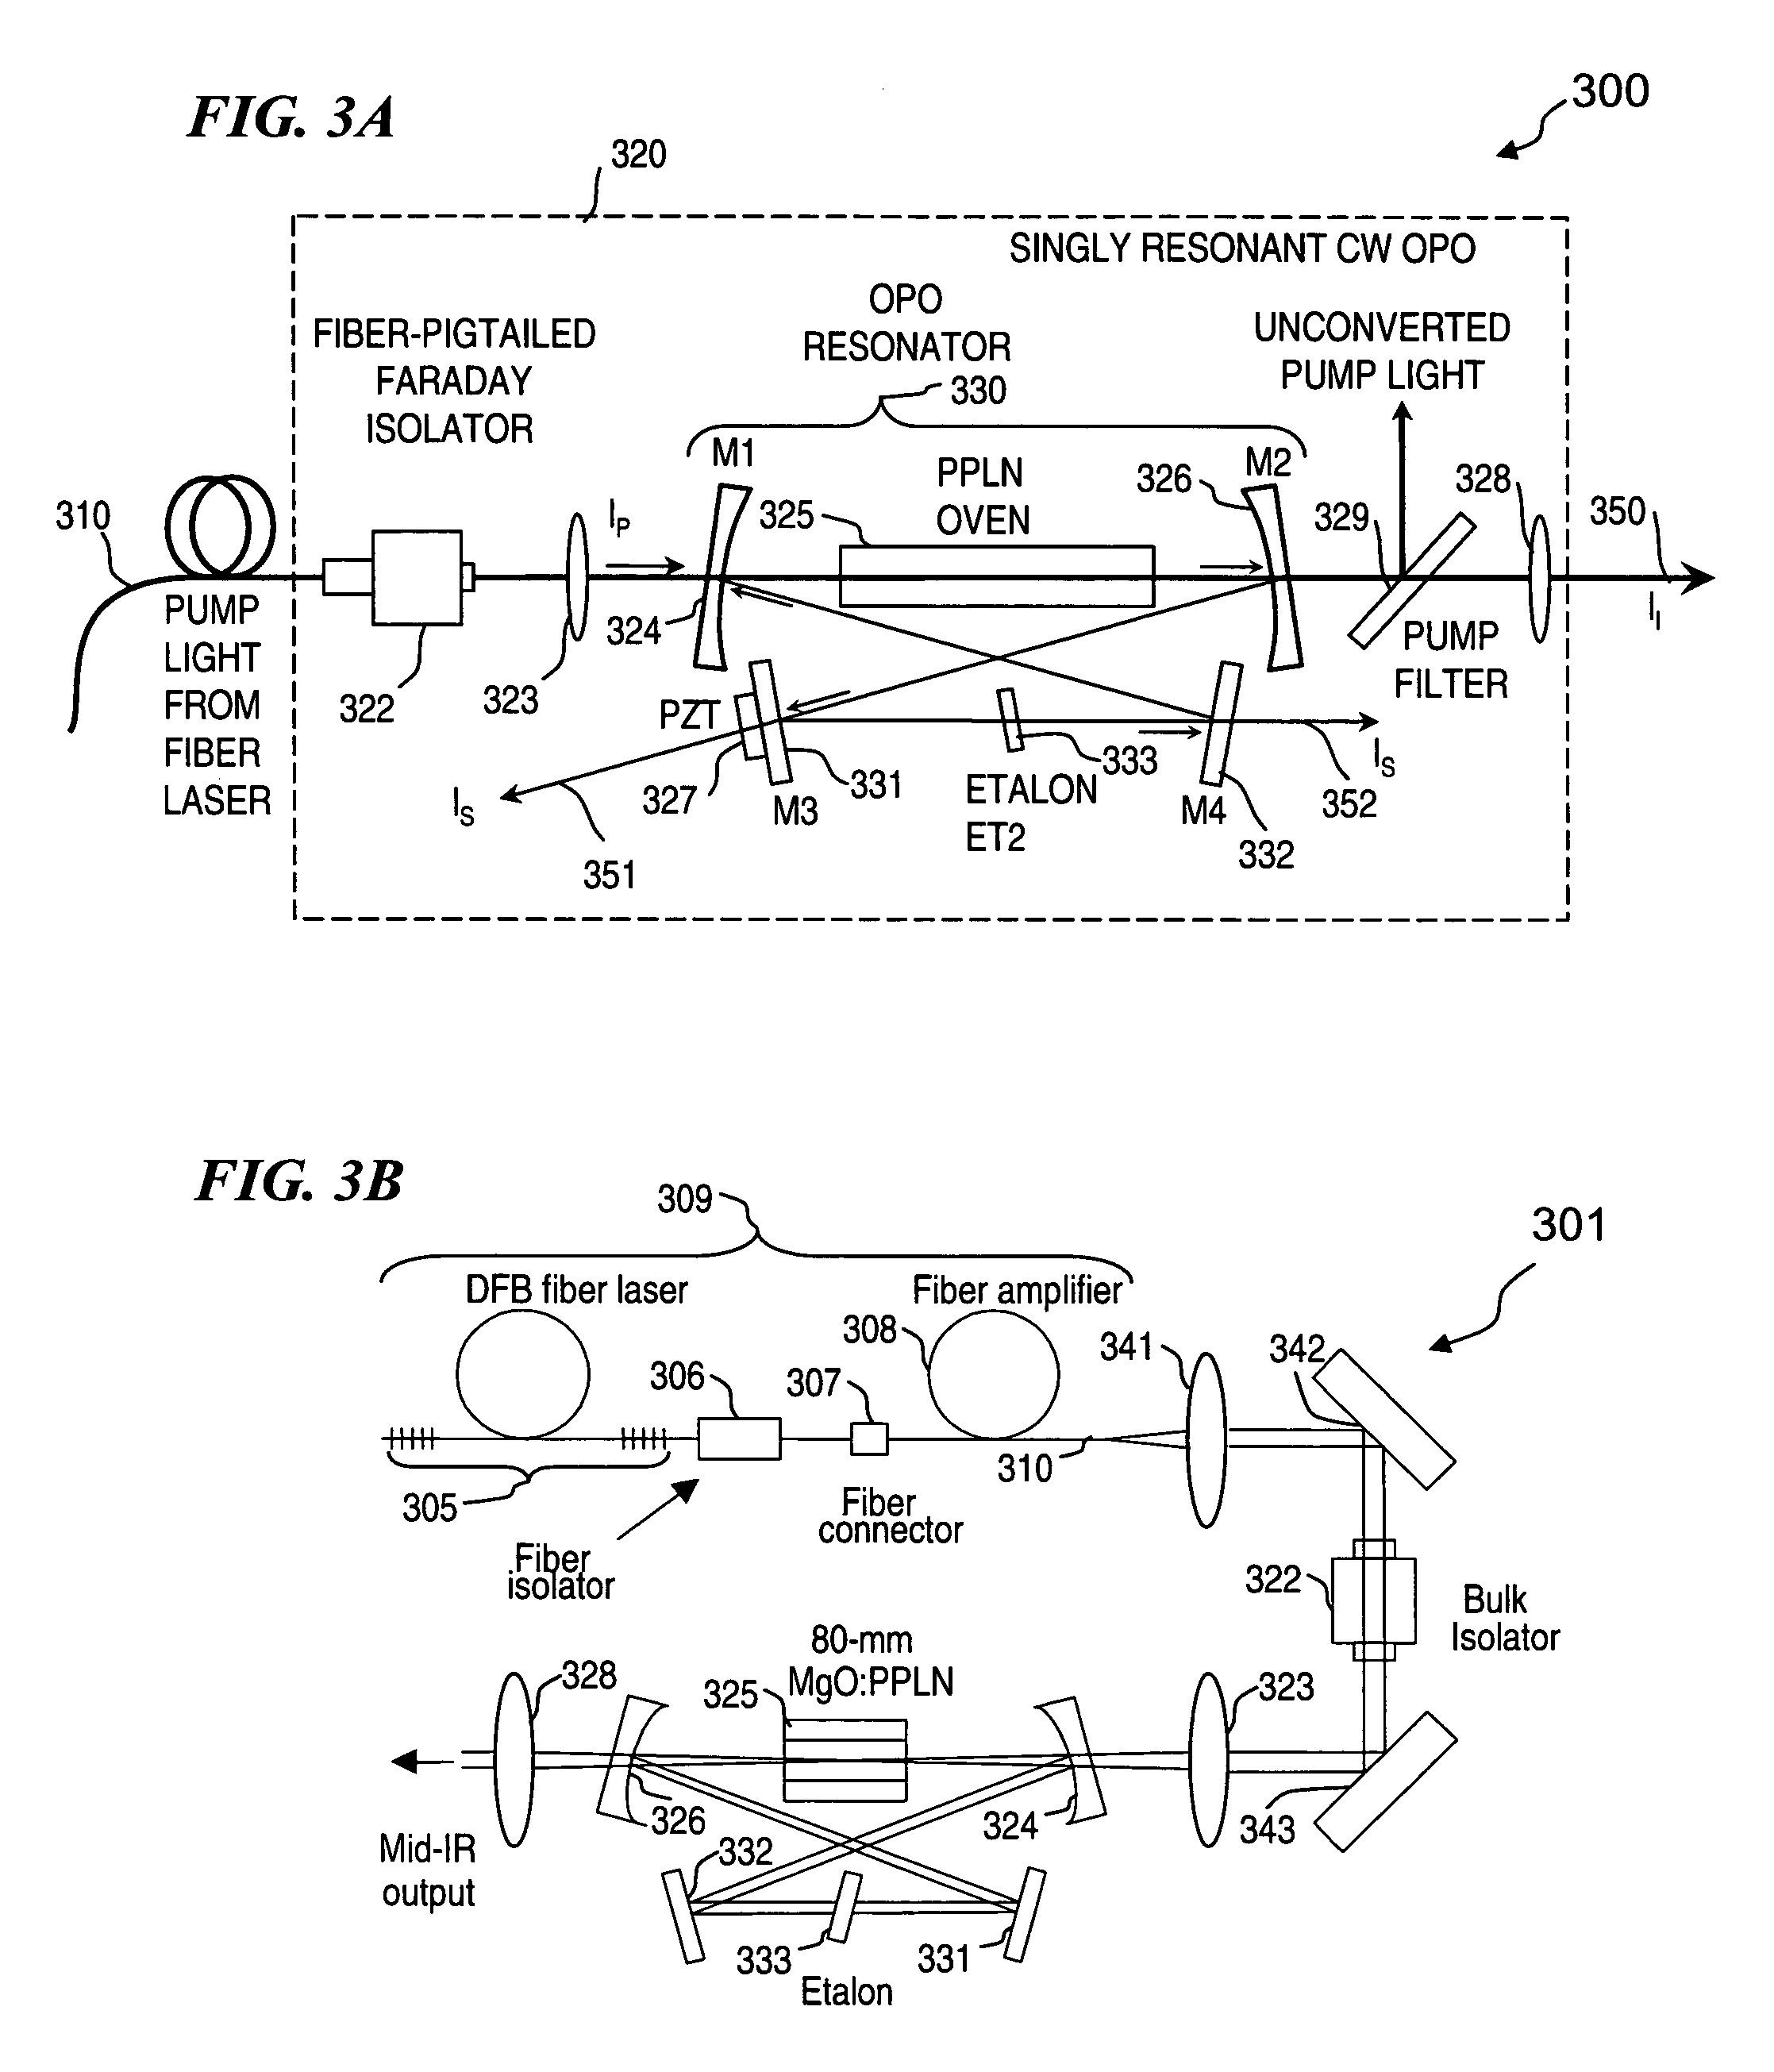 Apparatus and method for pumping and operating optical parametric oscillators using DFB fiber lasers